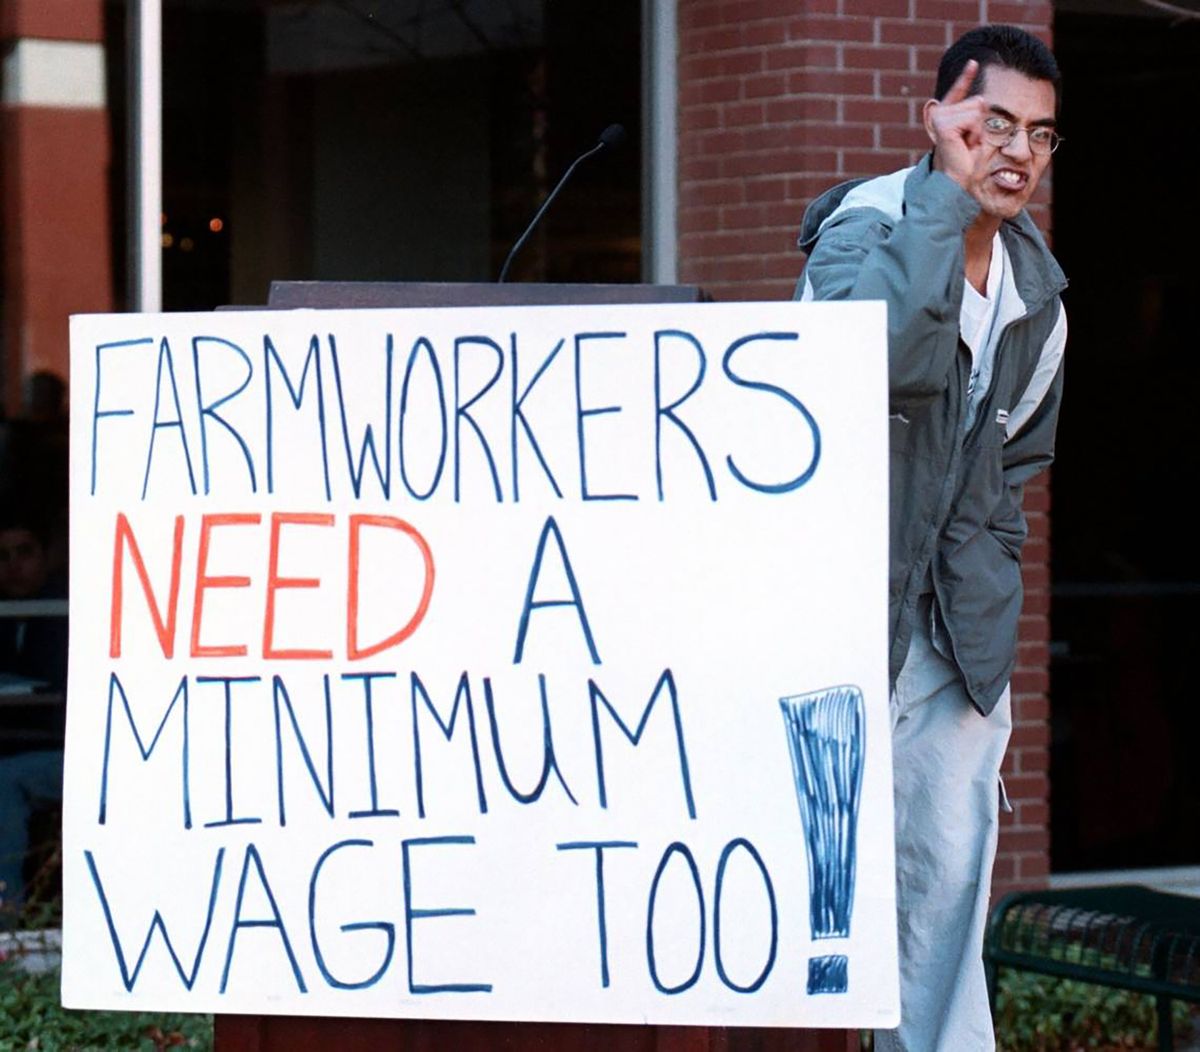 Leo Morales, a member of the Idaho Progressive Student Alliance, led students in a 2001 demonstration at the Boise State University Student Union Building, calling for the Legislature to set a minimum wage for farmworkers.    (Darin Oswald/Idaho Statesman/TNS)